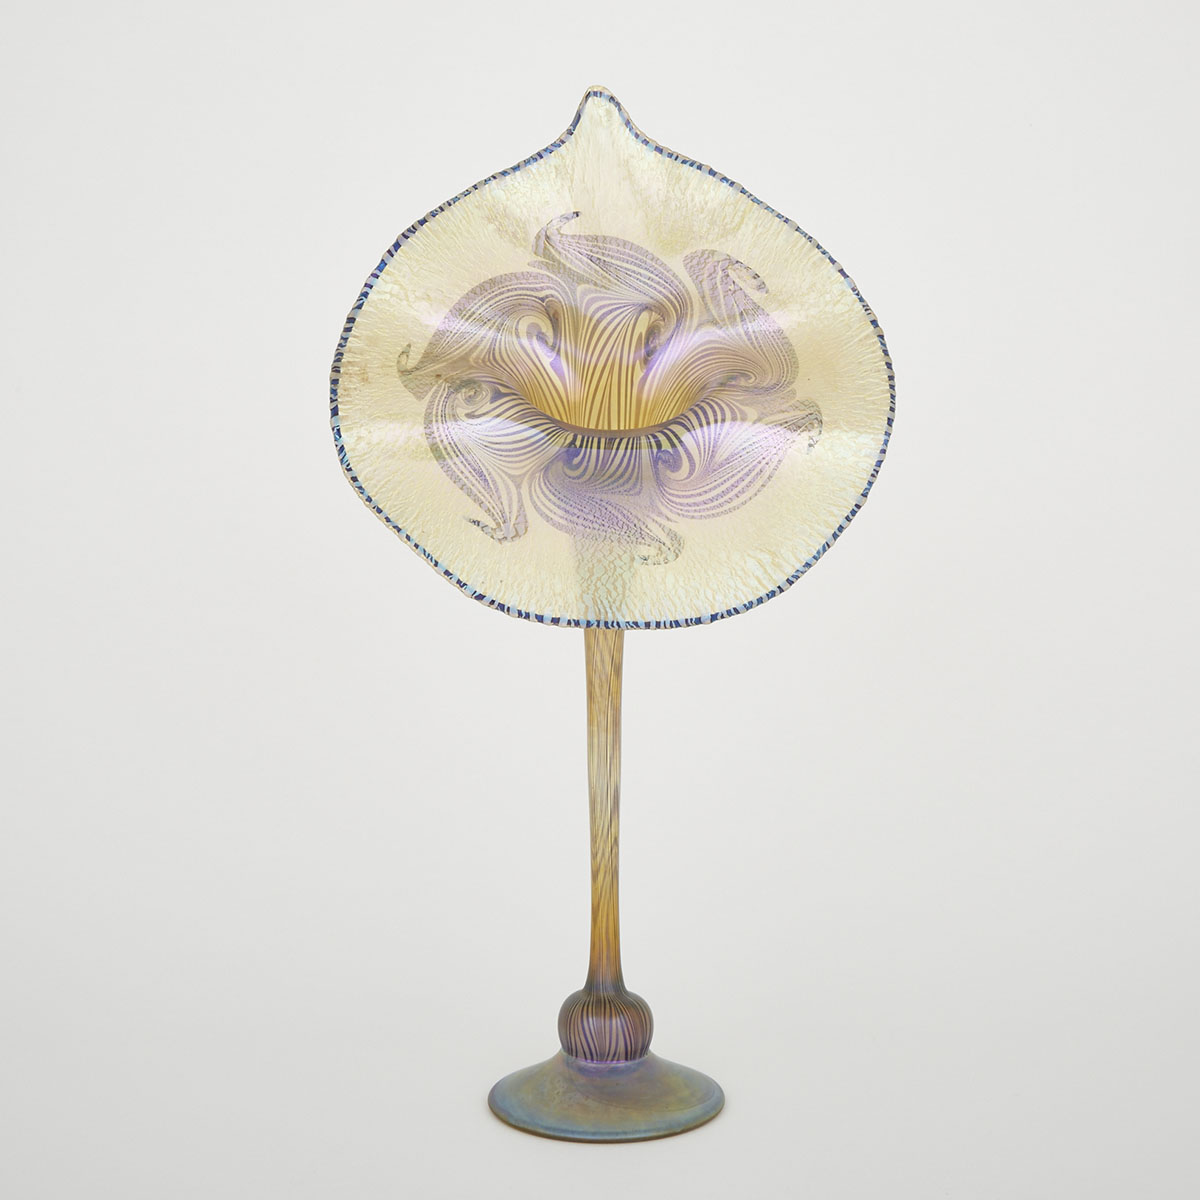 Decorated Iridescent Glass Jack-in-the-Pulpit Vase, 20th century